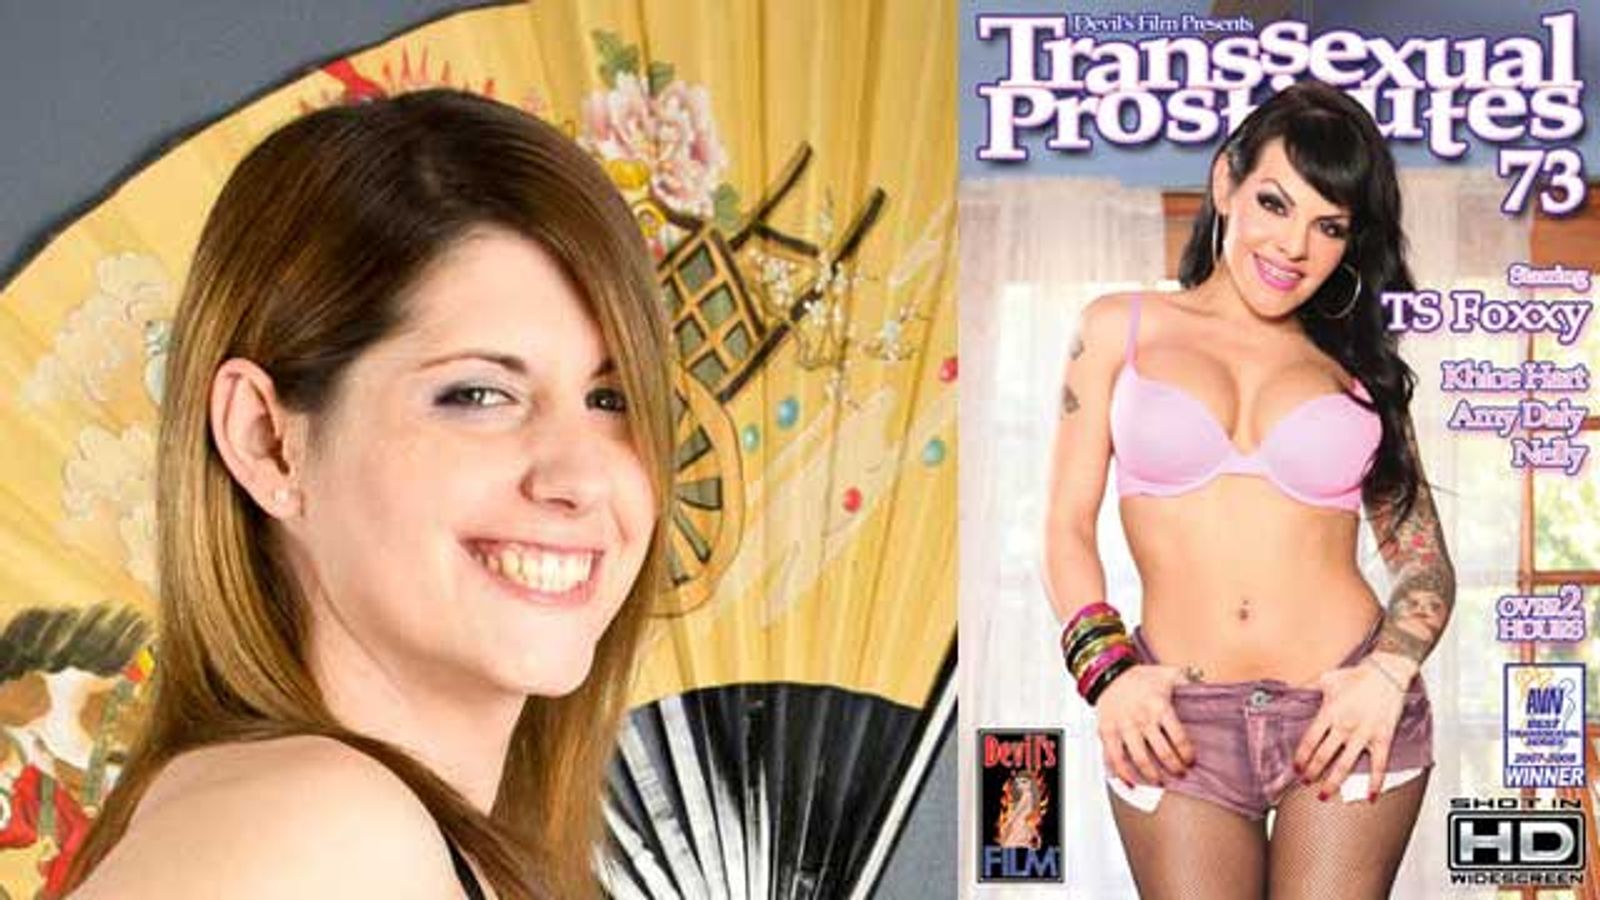 Amy Daly Stars in 'Transsexual Prostitutes 73' for Devil's Film